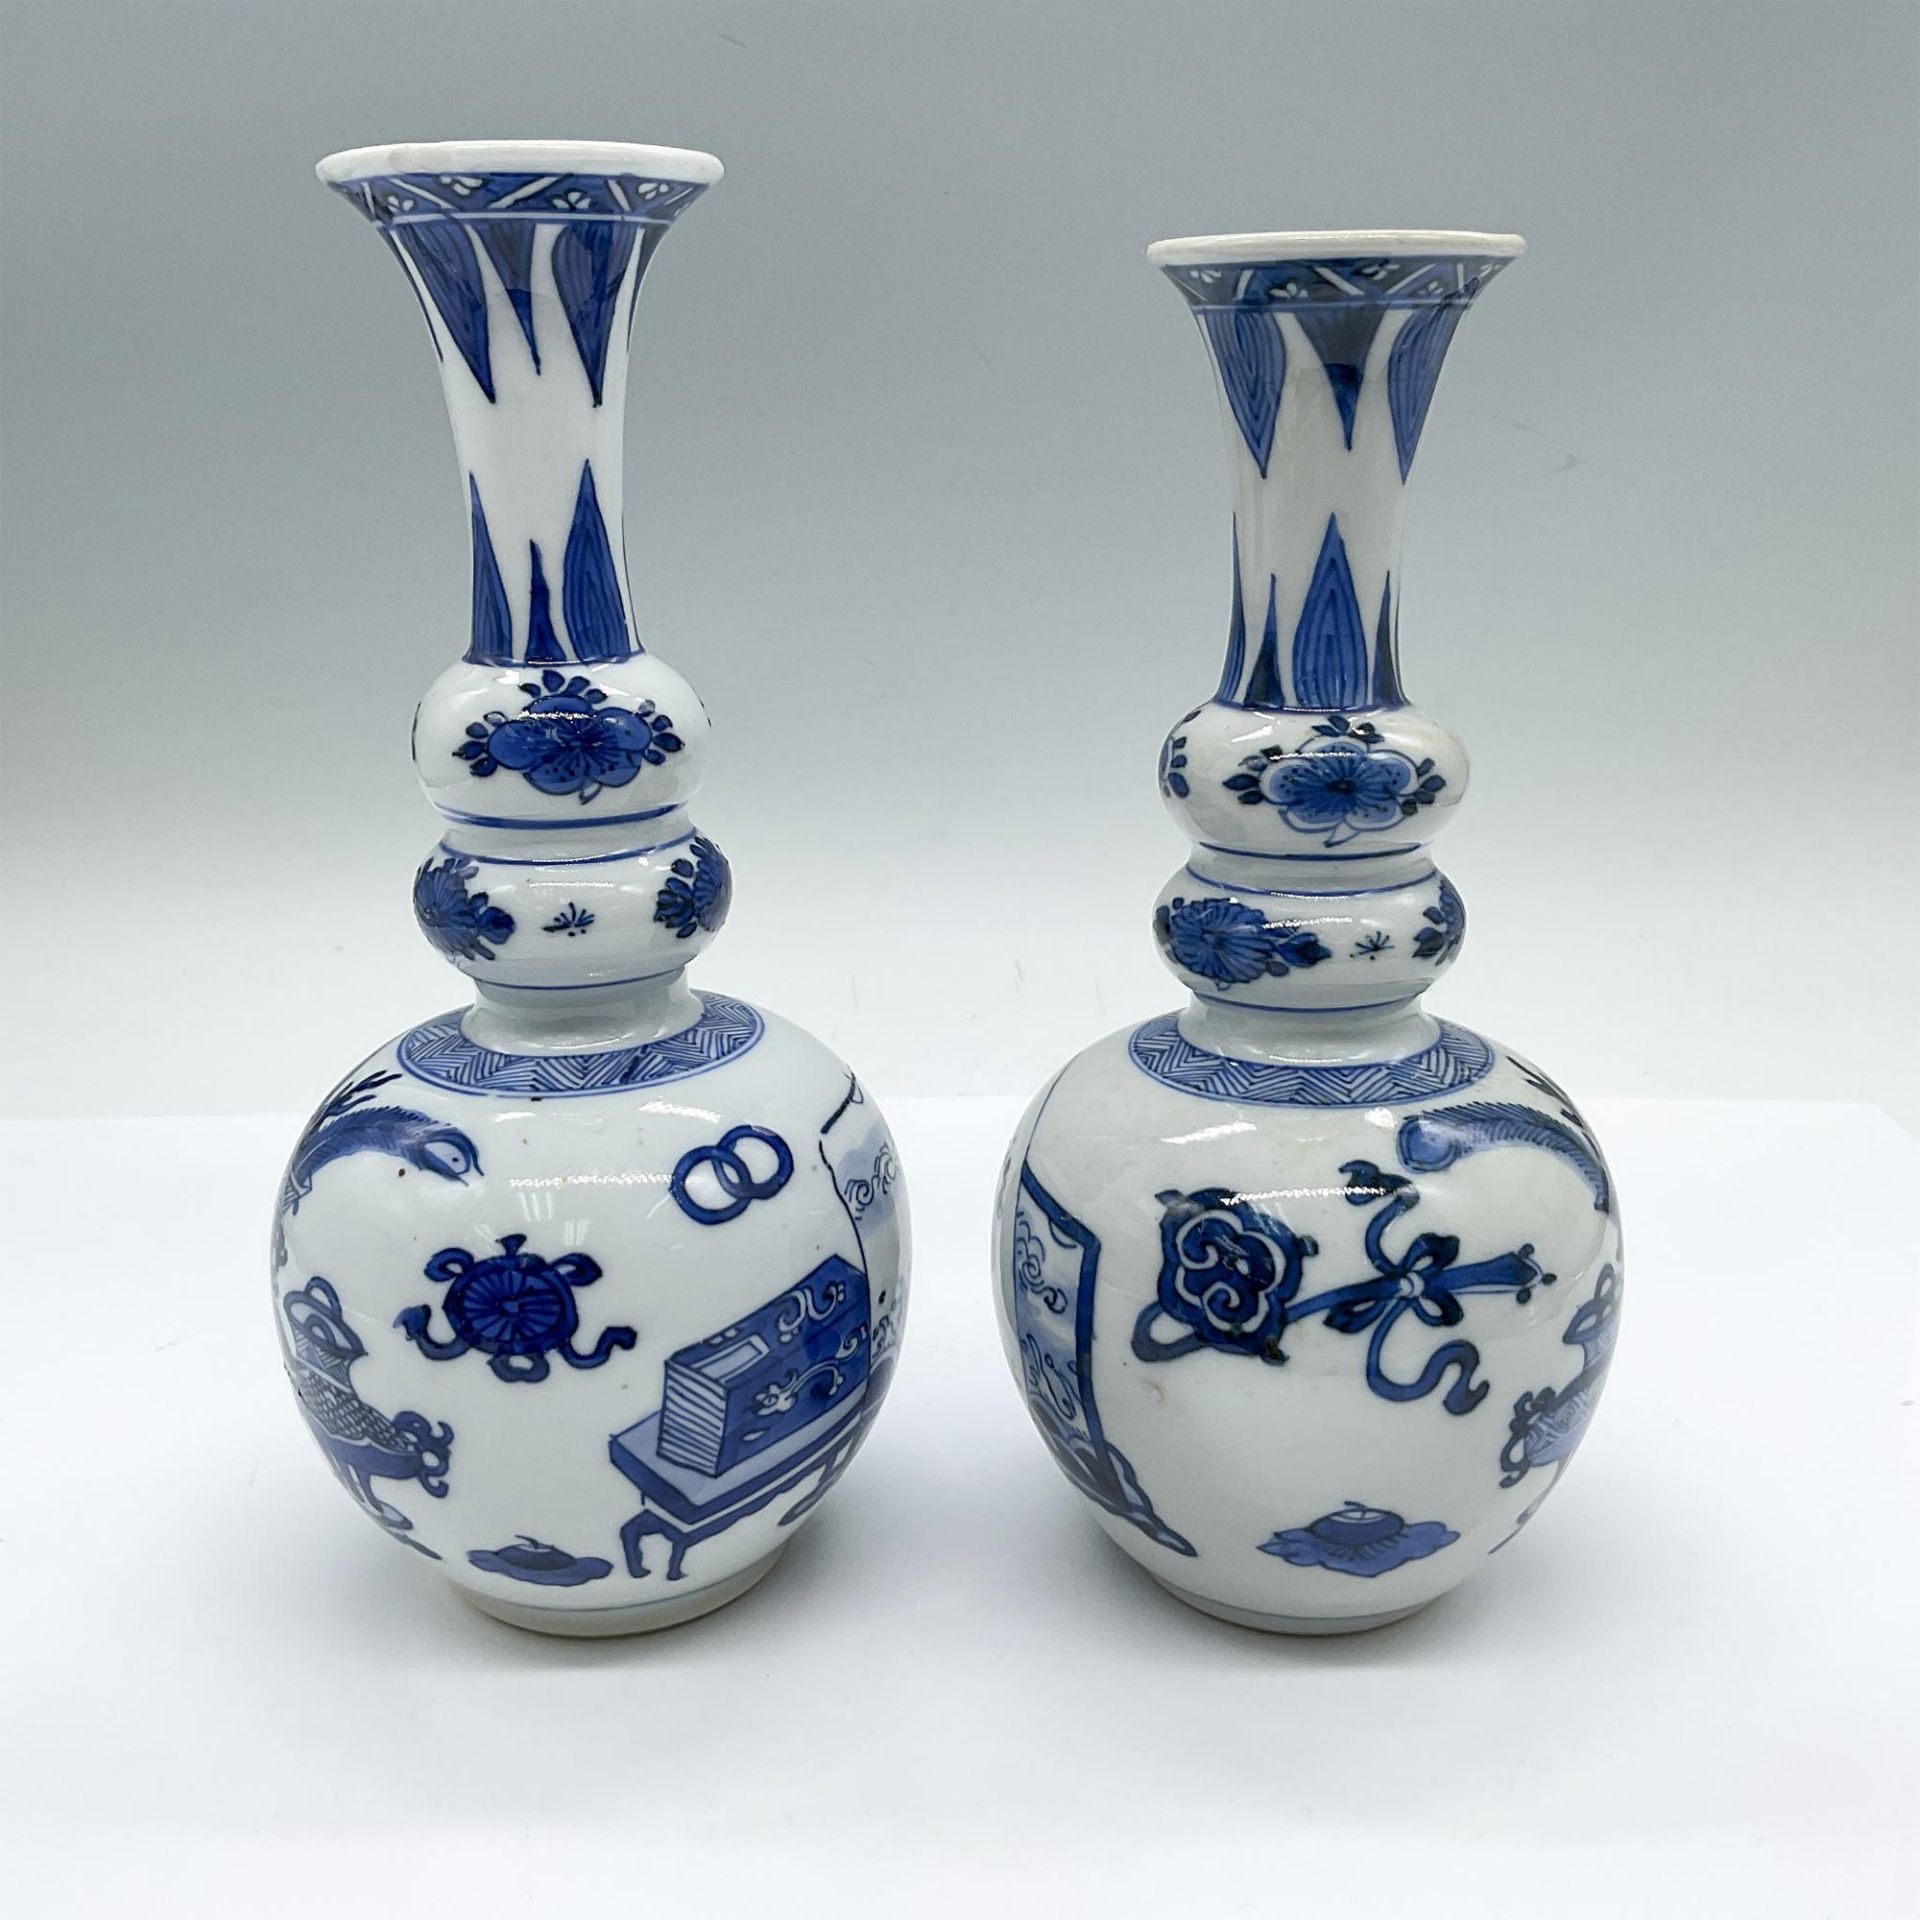 Pair of Chinese Blue and White Porcelain Vases - Image 4 of 5